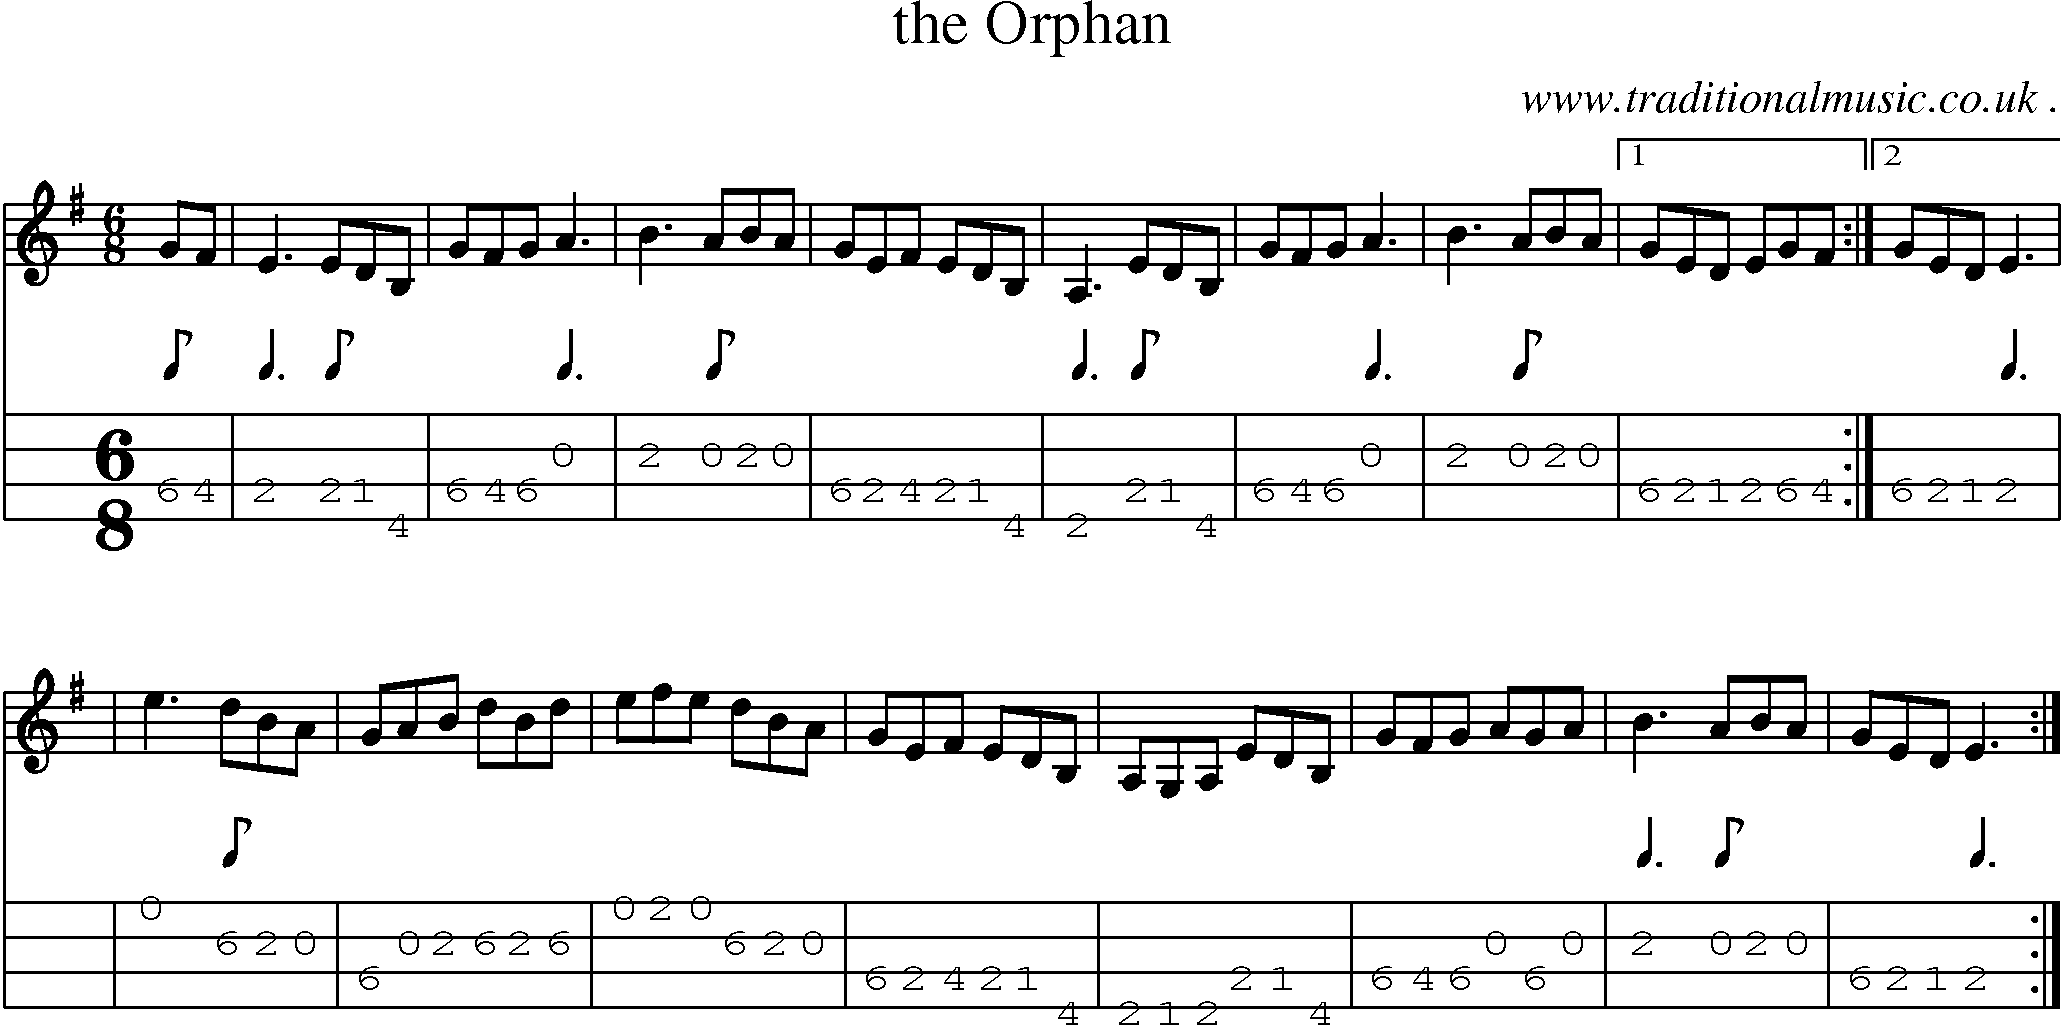 Sheet-music  score, Chords and Mandolin Tabs for The Orphan